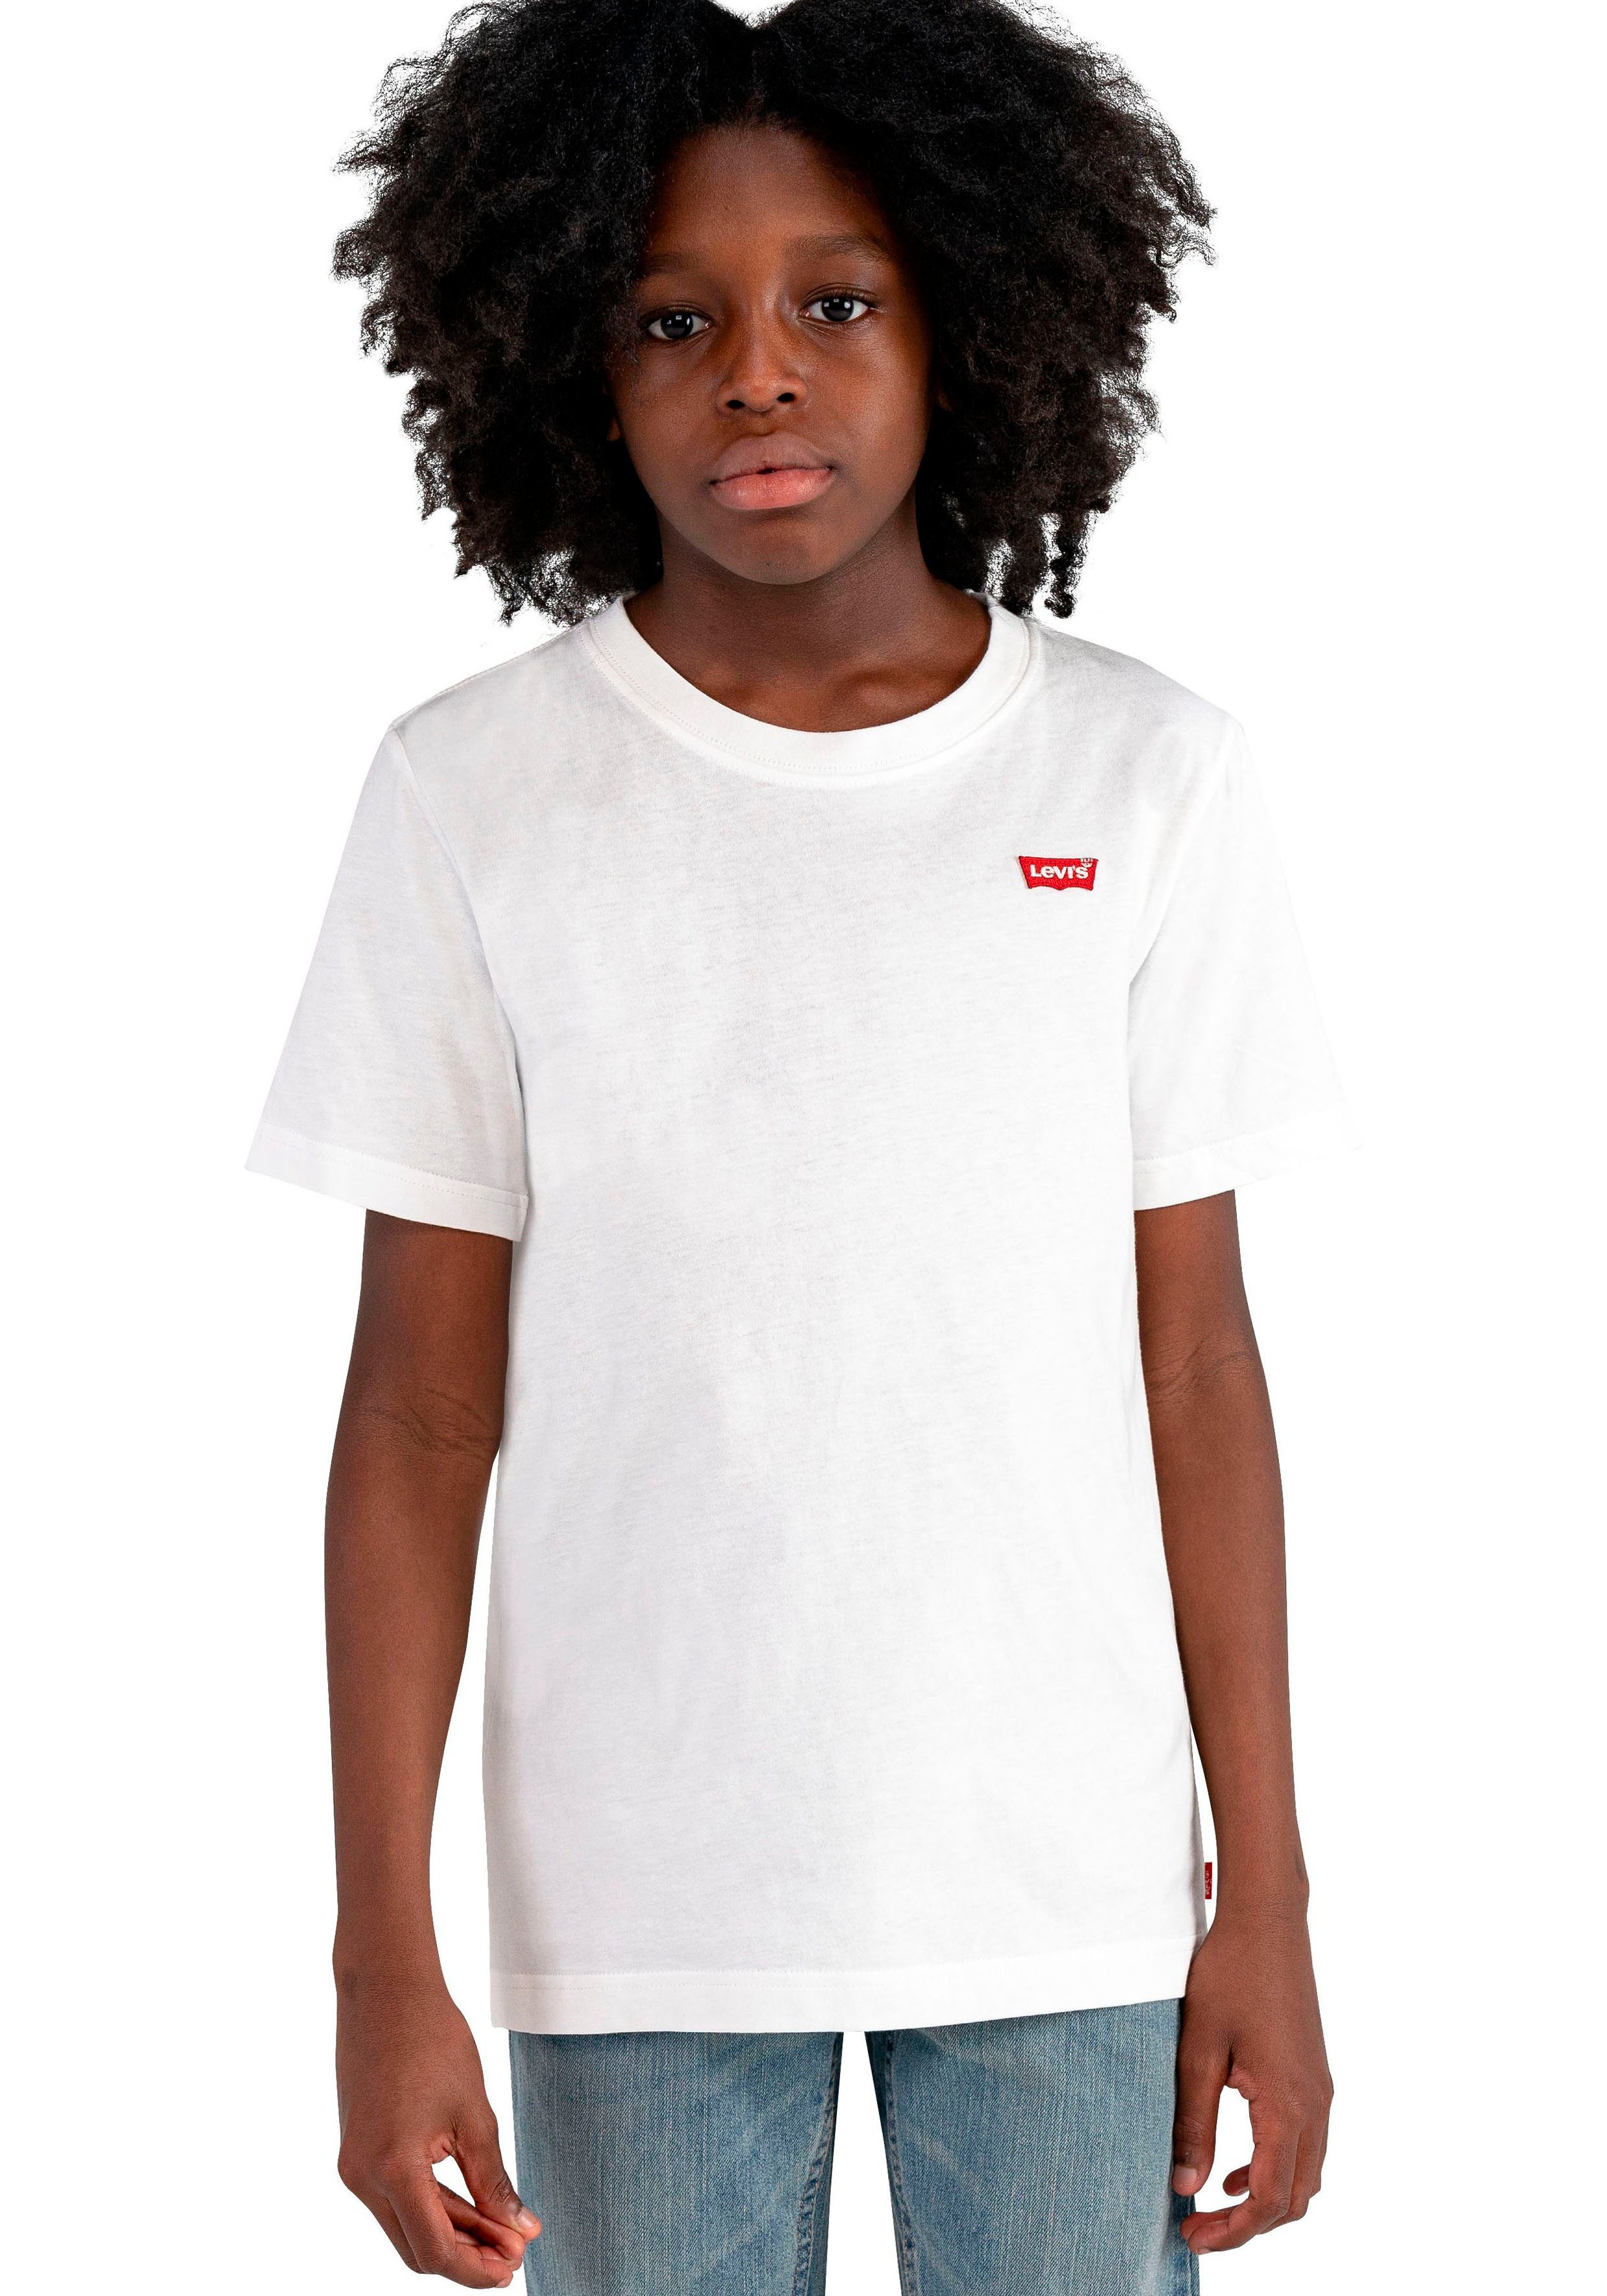 Levi's® Kids T-Shirt CHEST HIT BOYS BATWING white for